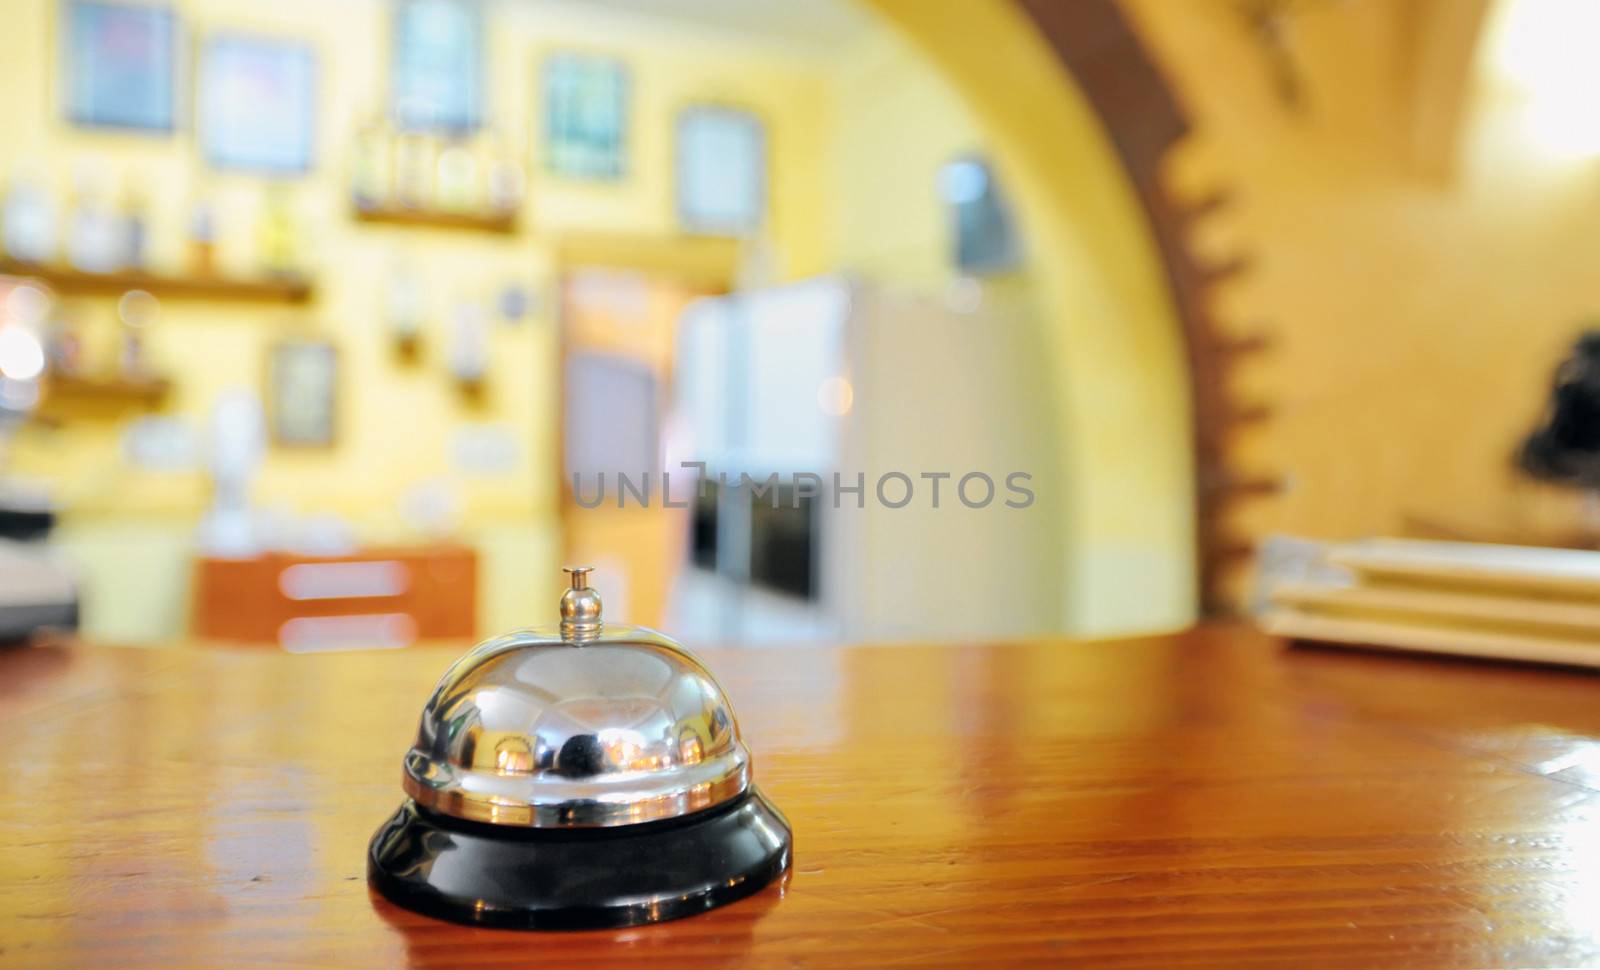 service bell at the hotel by mady70